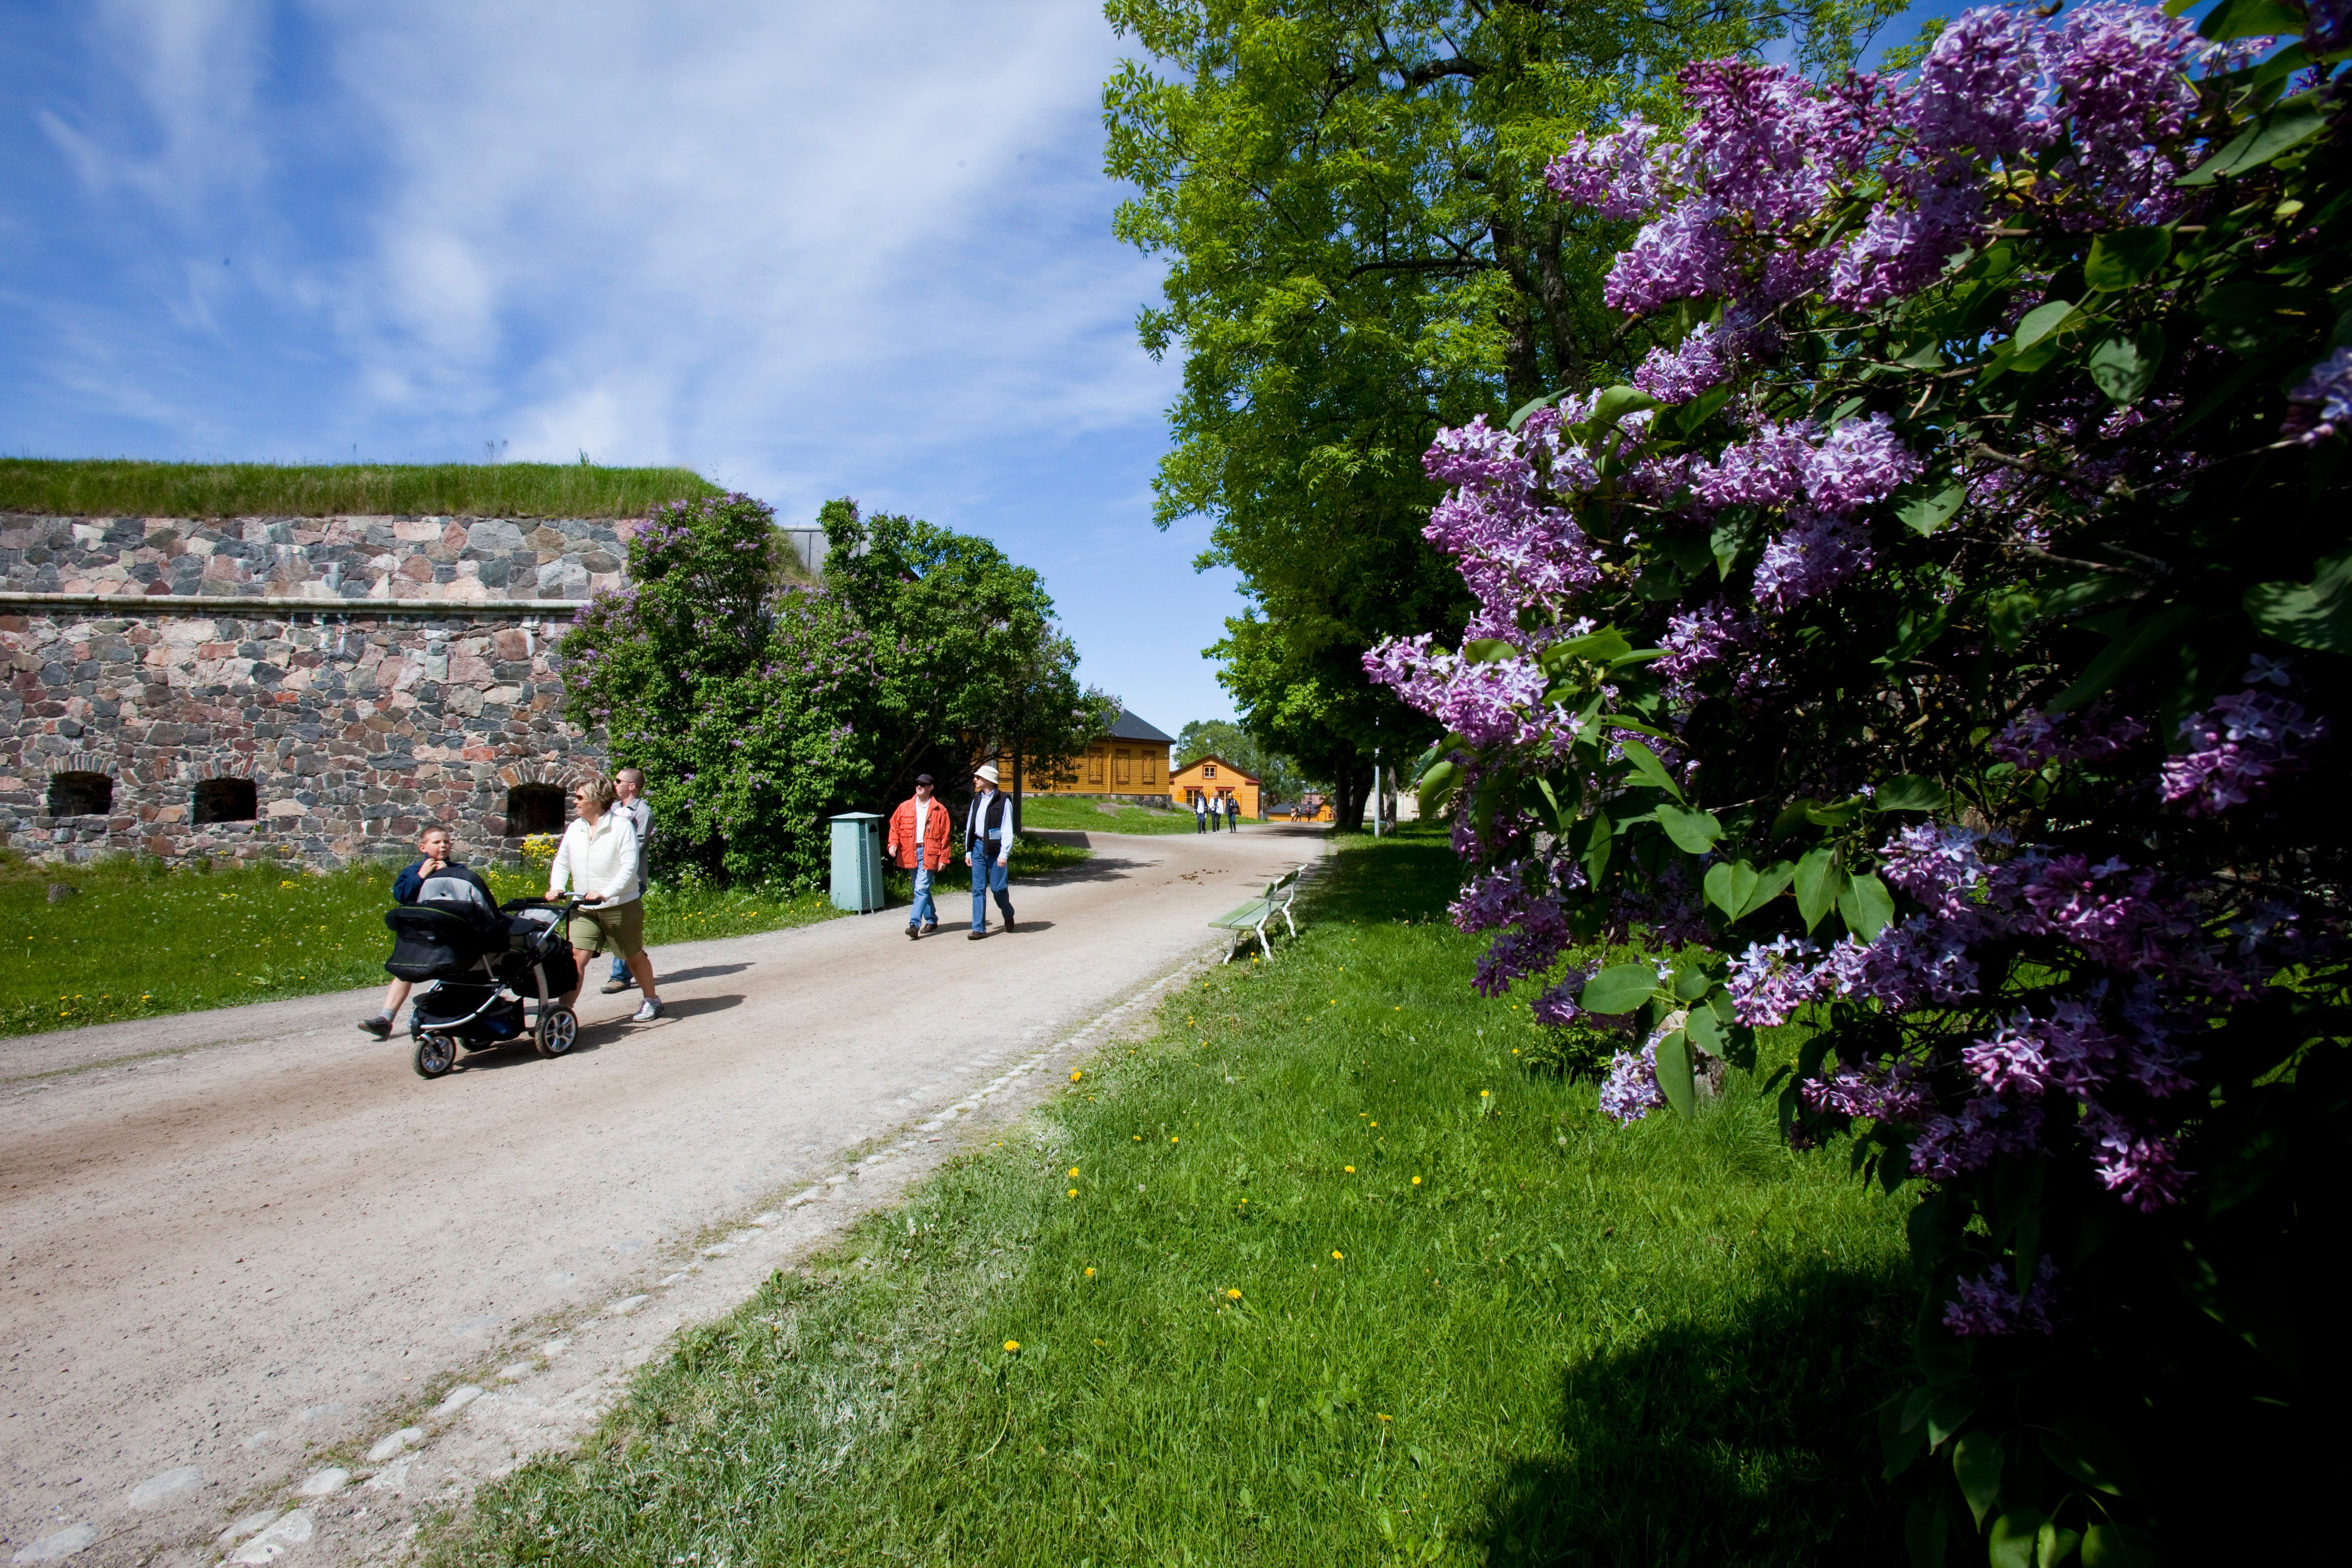 Helsinki highlights and audio guided tour at Suomenlinna